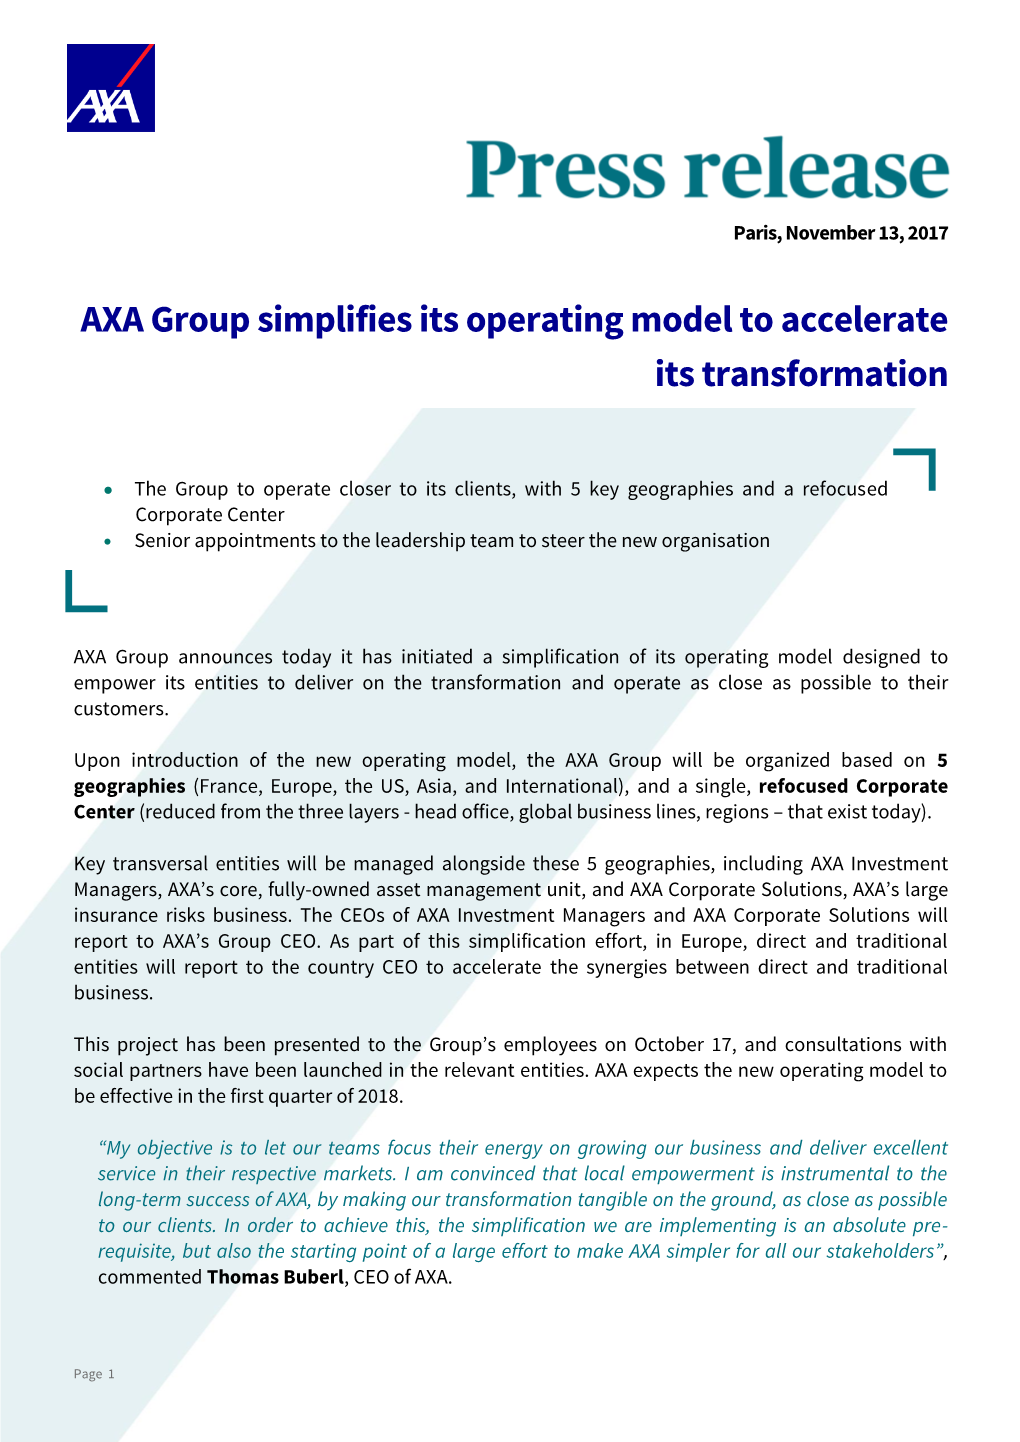 AXA Group Simplifies Its Operating Model to Accelerate Its Transformation